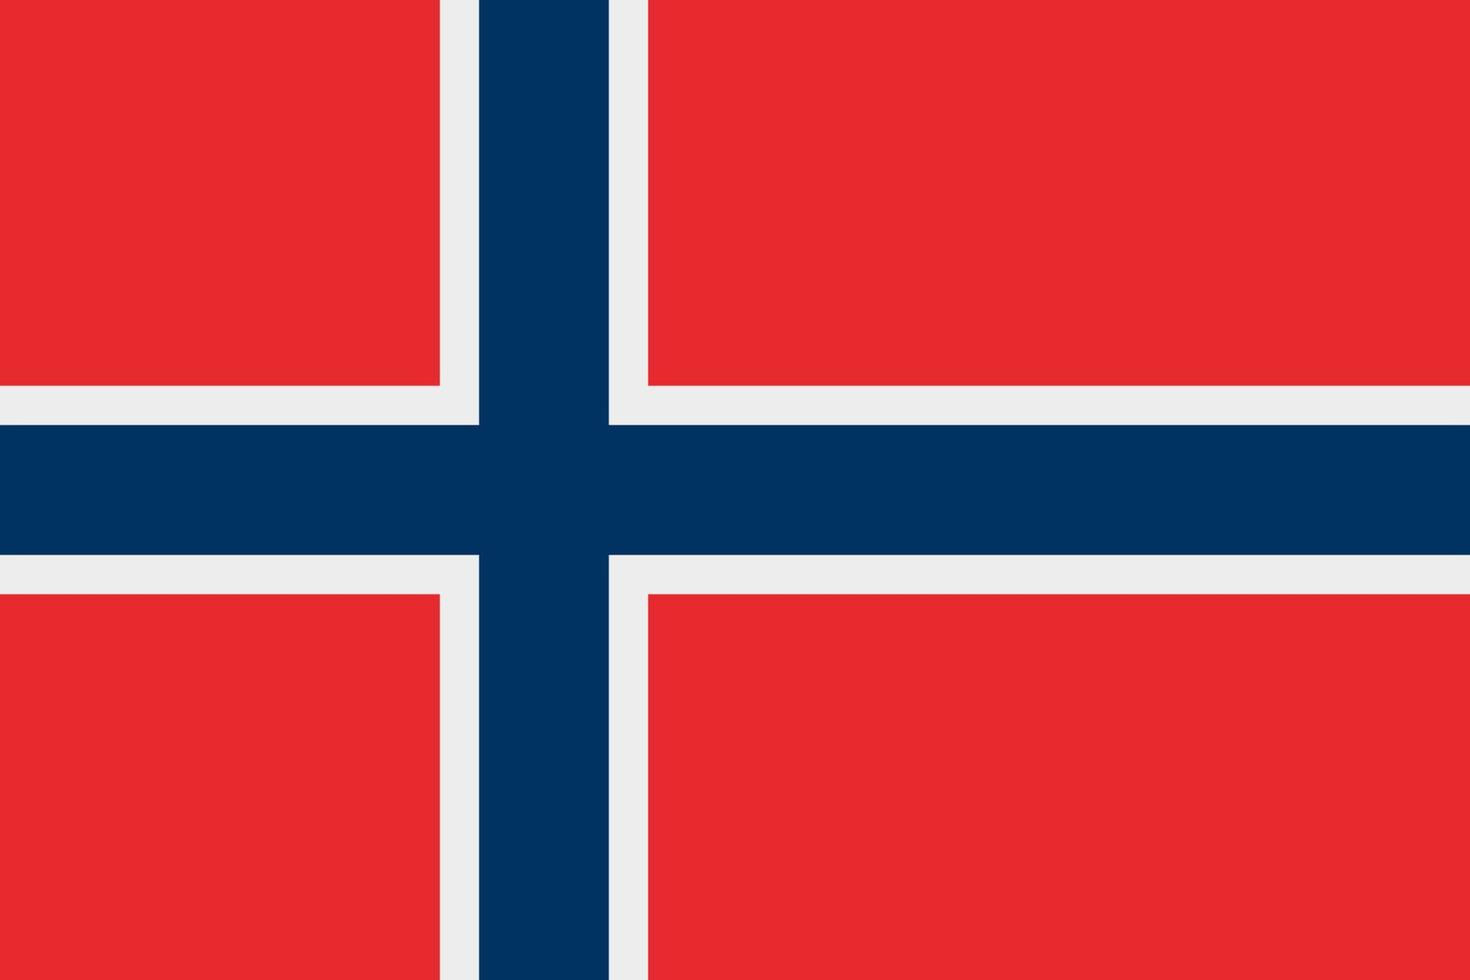 Norwegian flag vector icon. The flag of Norway